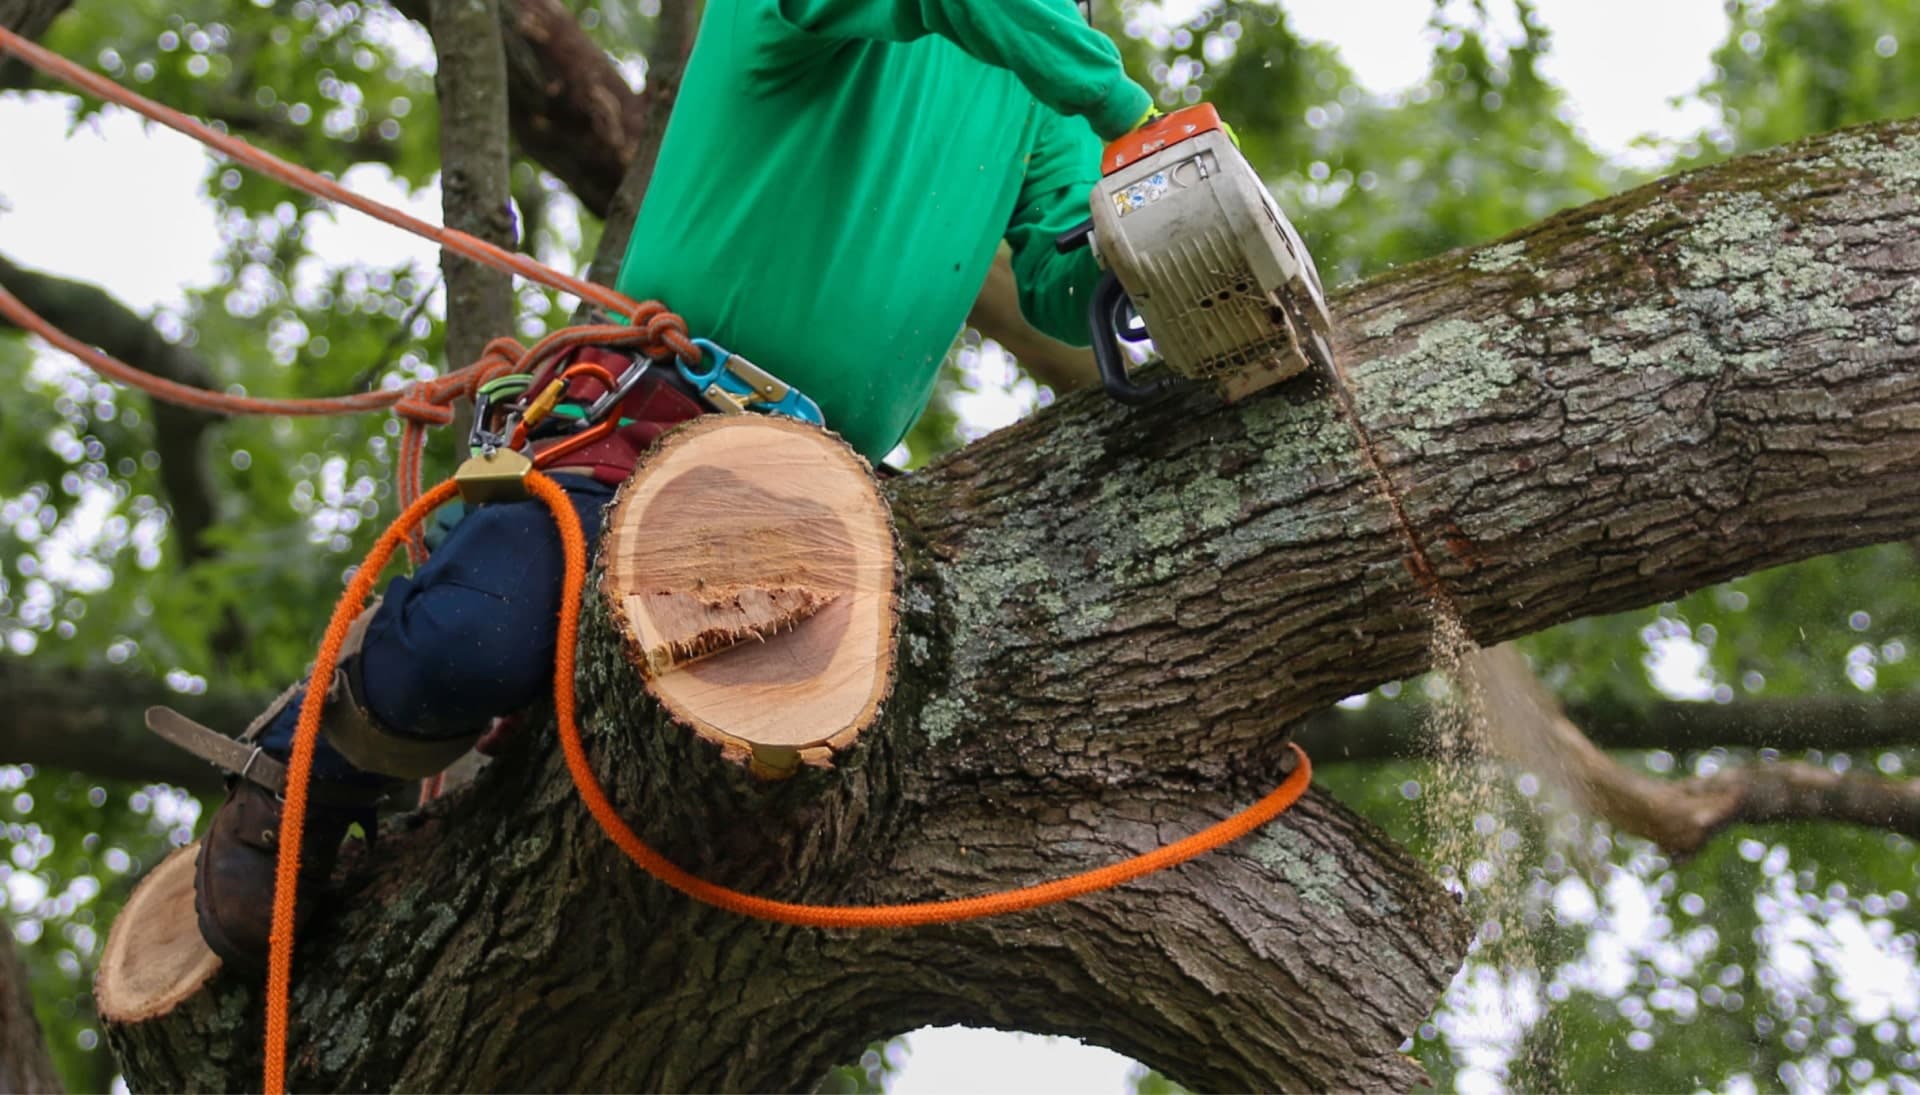 Shed your worries away with best tree removal in Boston